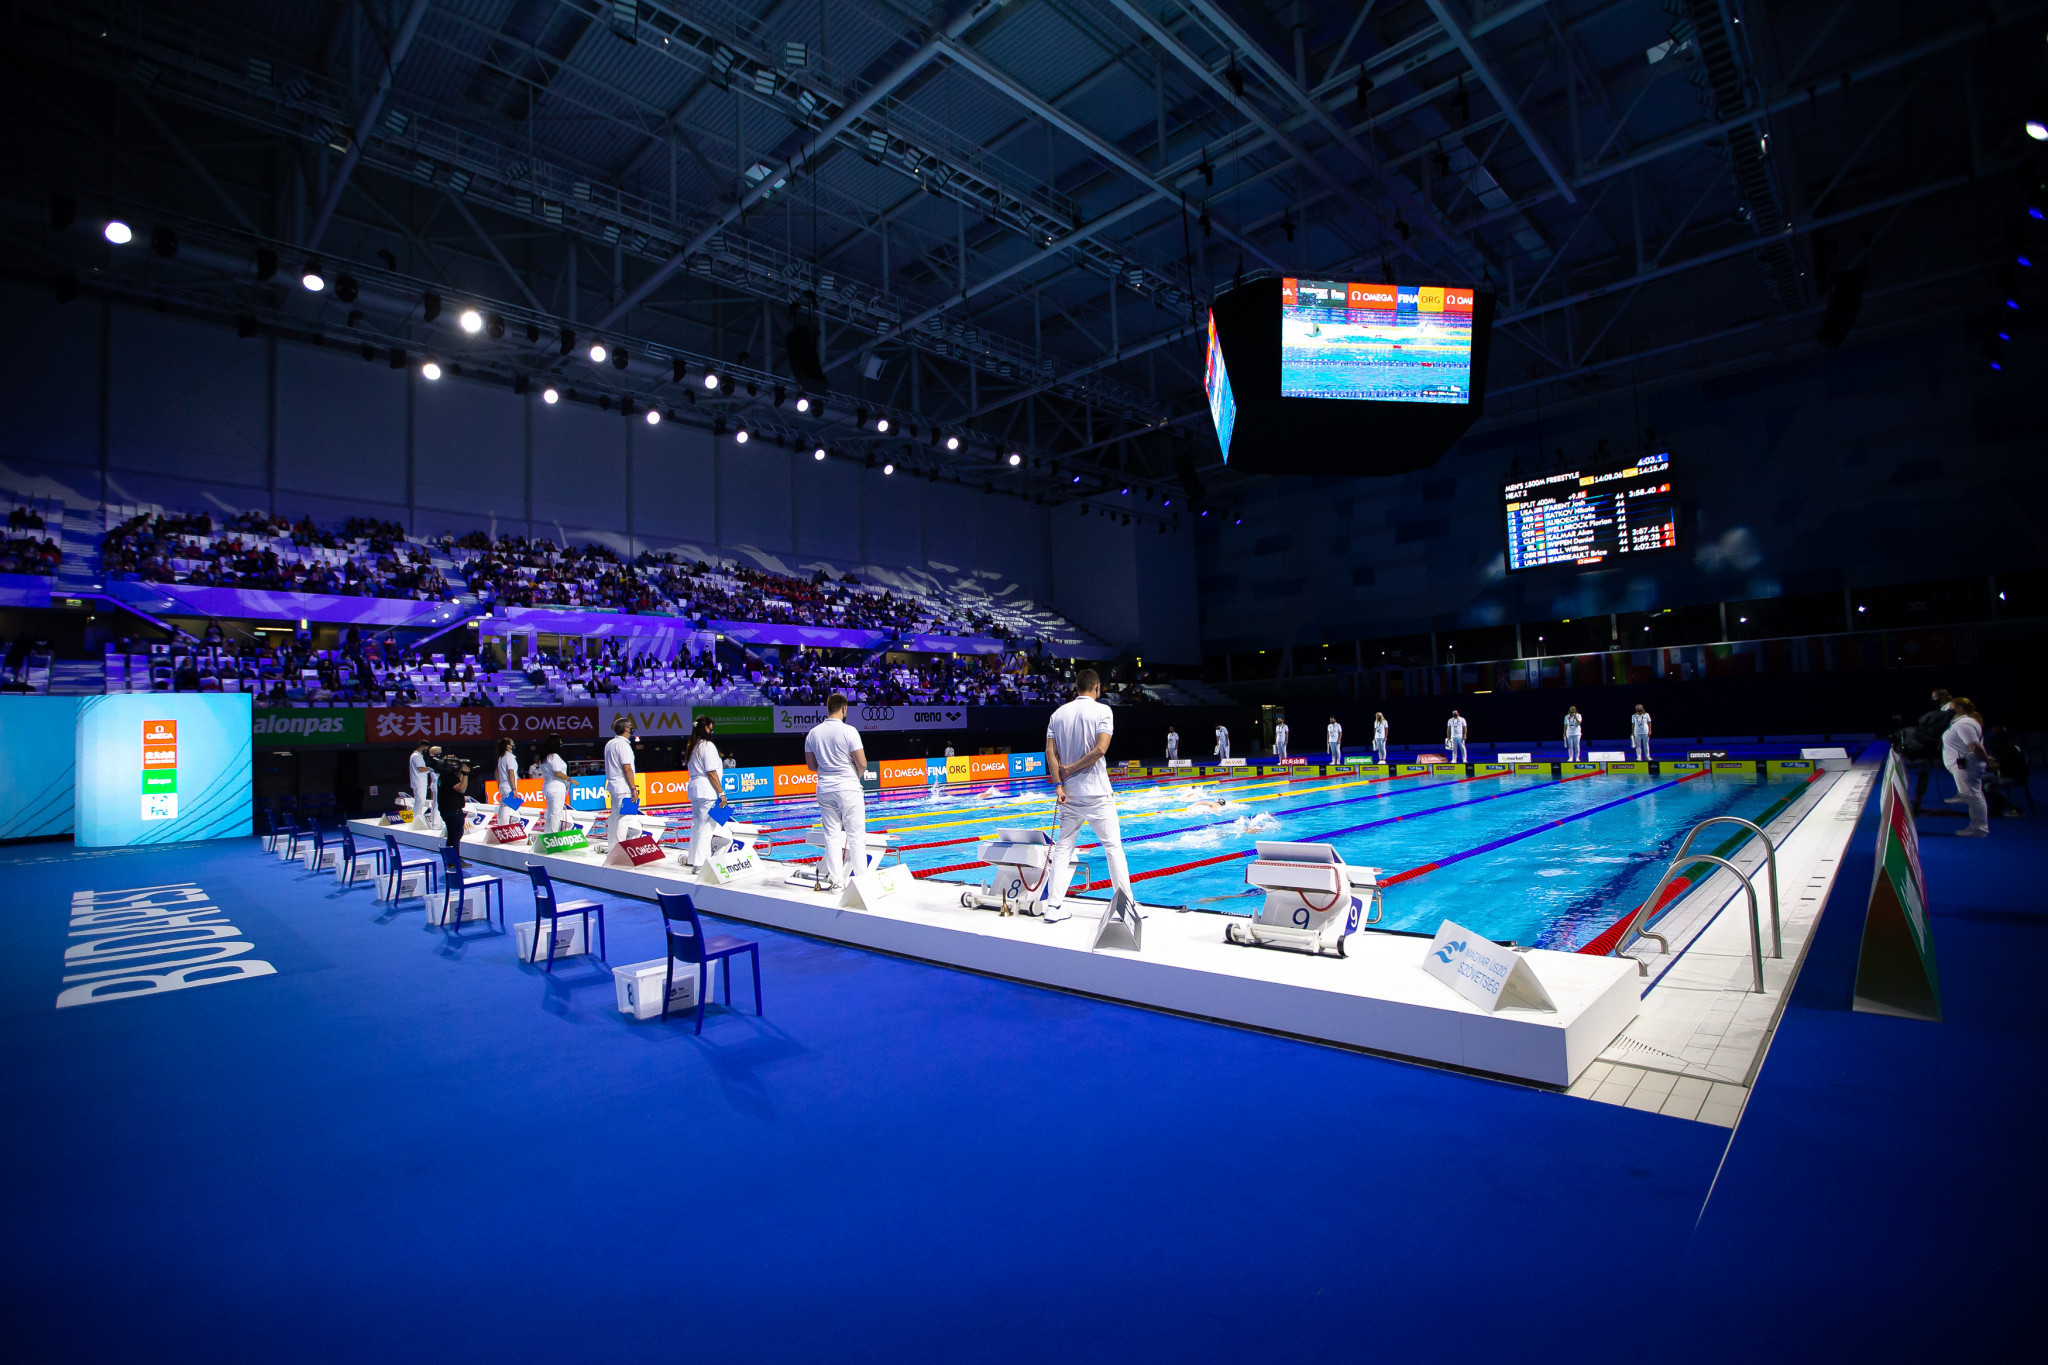 Budapest's Duna Arena is currently hosting the FINA World Championships after its initial staging in 2017, and will also be the venue for the 2027 edition ©Getty Images